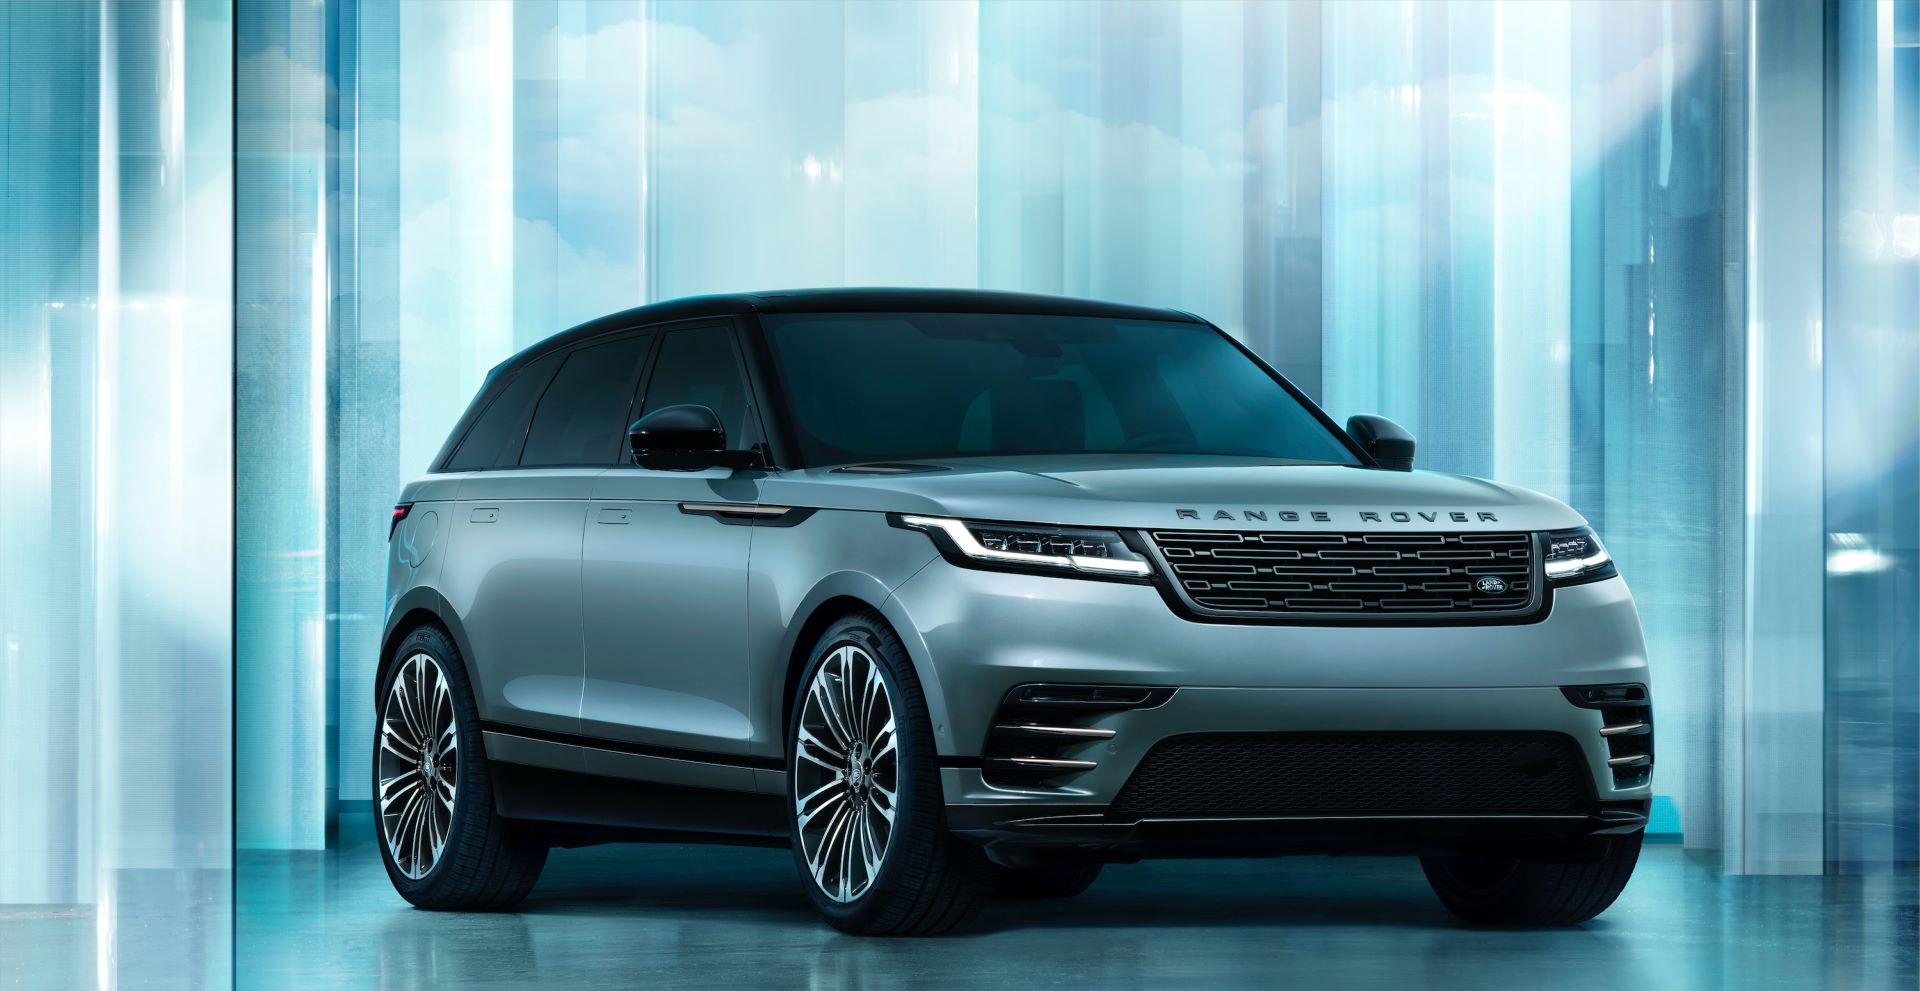 Range Rover Velar – Enhanced electrified performance and superior breadth of capability